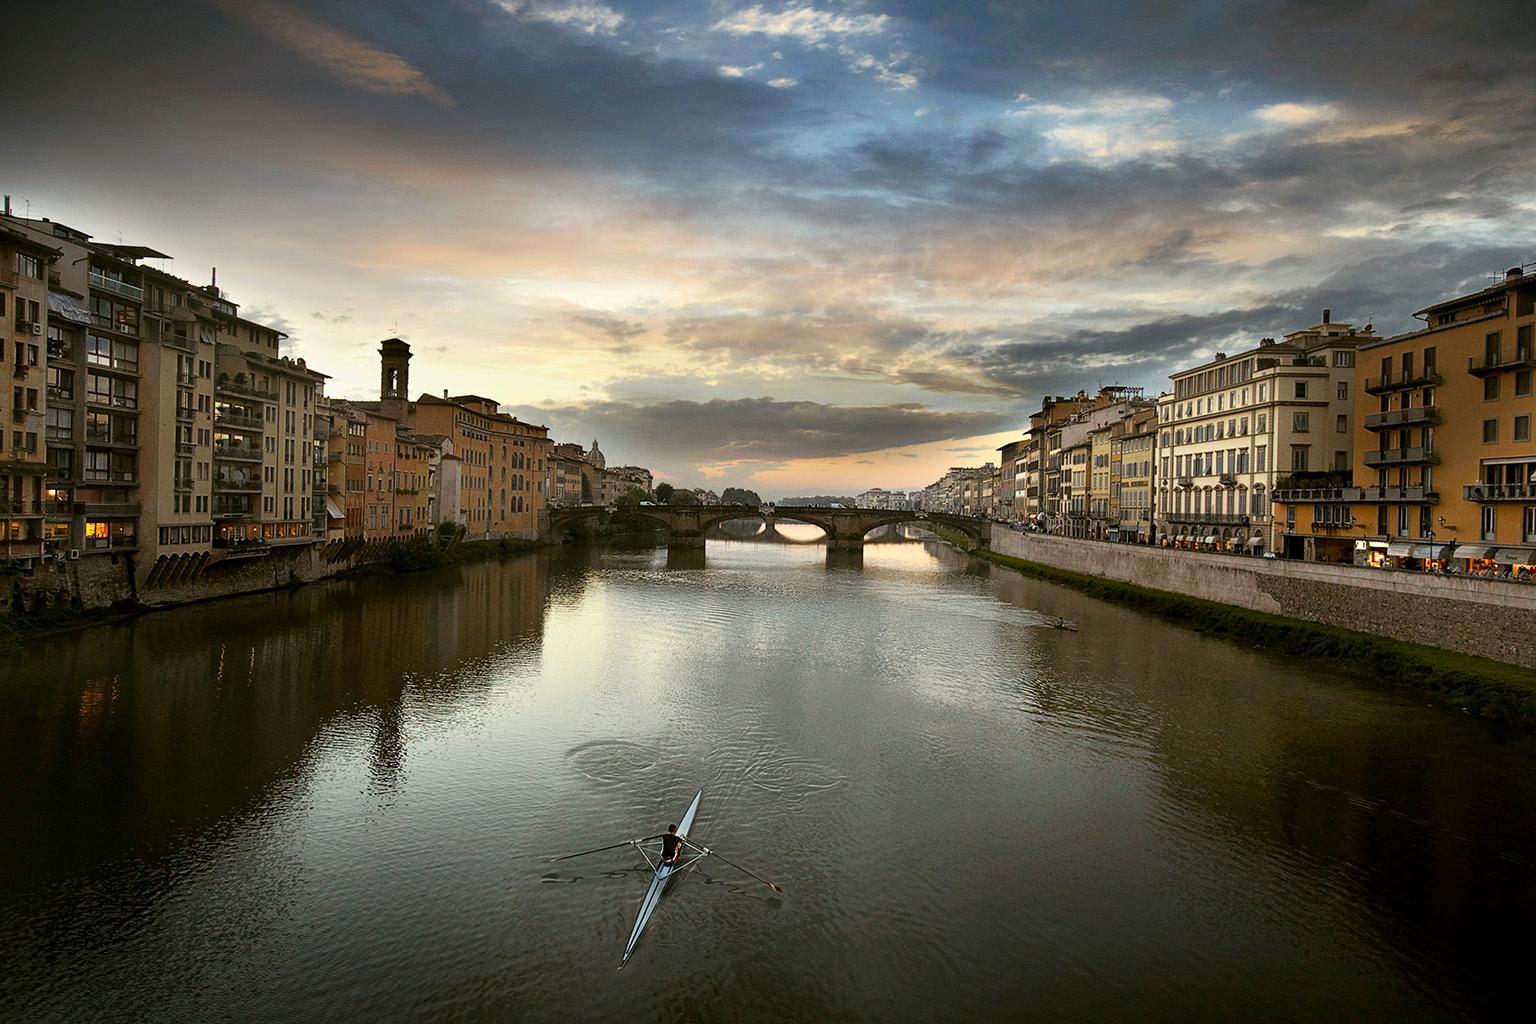 Sculling the Arno, Florence, Italy. - Photograph by George Simhoni